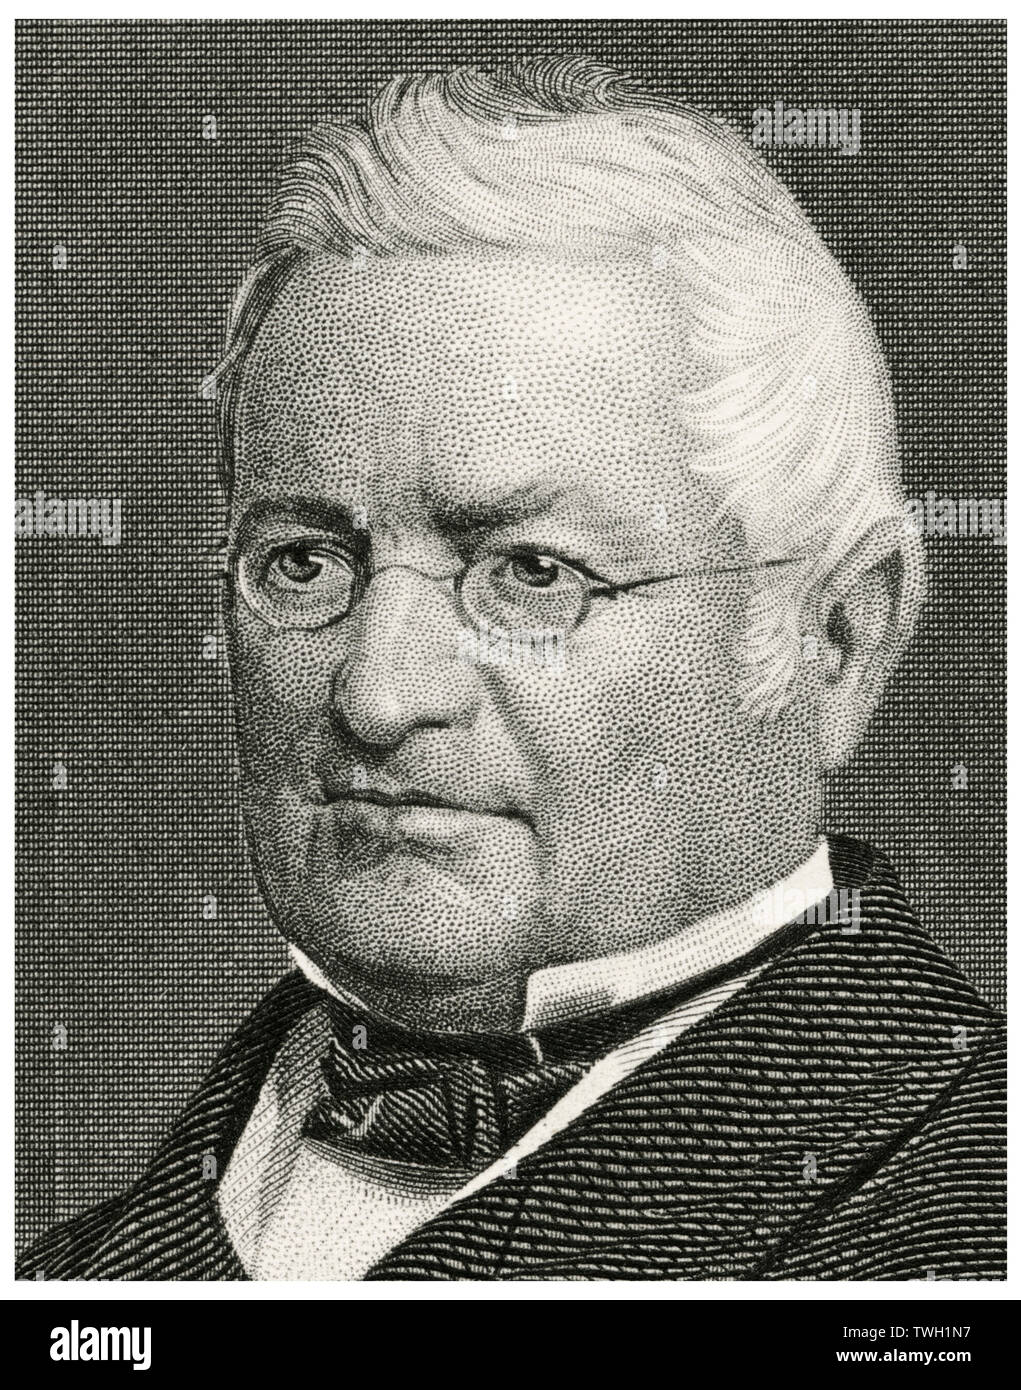 Adolphe Thiers (1797-1877), French Statesman, Journalist and Historian, Second Elected President of France, and the first President of the French Third Republic, Head and Shoulders Portrait, Steel Engraving, Portrait Gallery of Eminent Men and Women of Europe and America by Evert A. Duyckinck, Published by Henry J. Johnson, Johnson, Wilson & Company, New York, 1873 Stock Photo